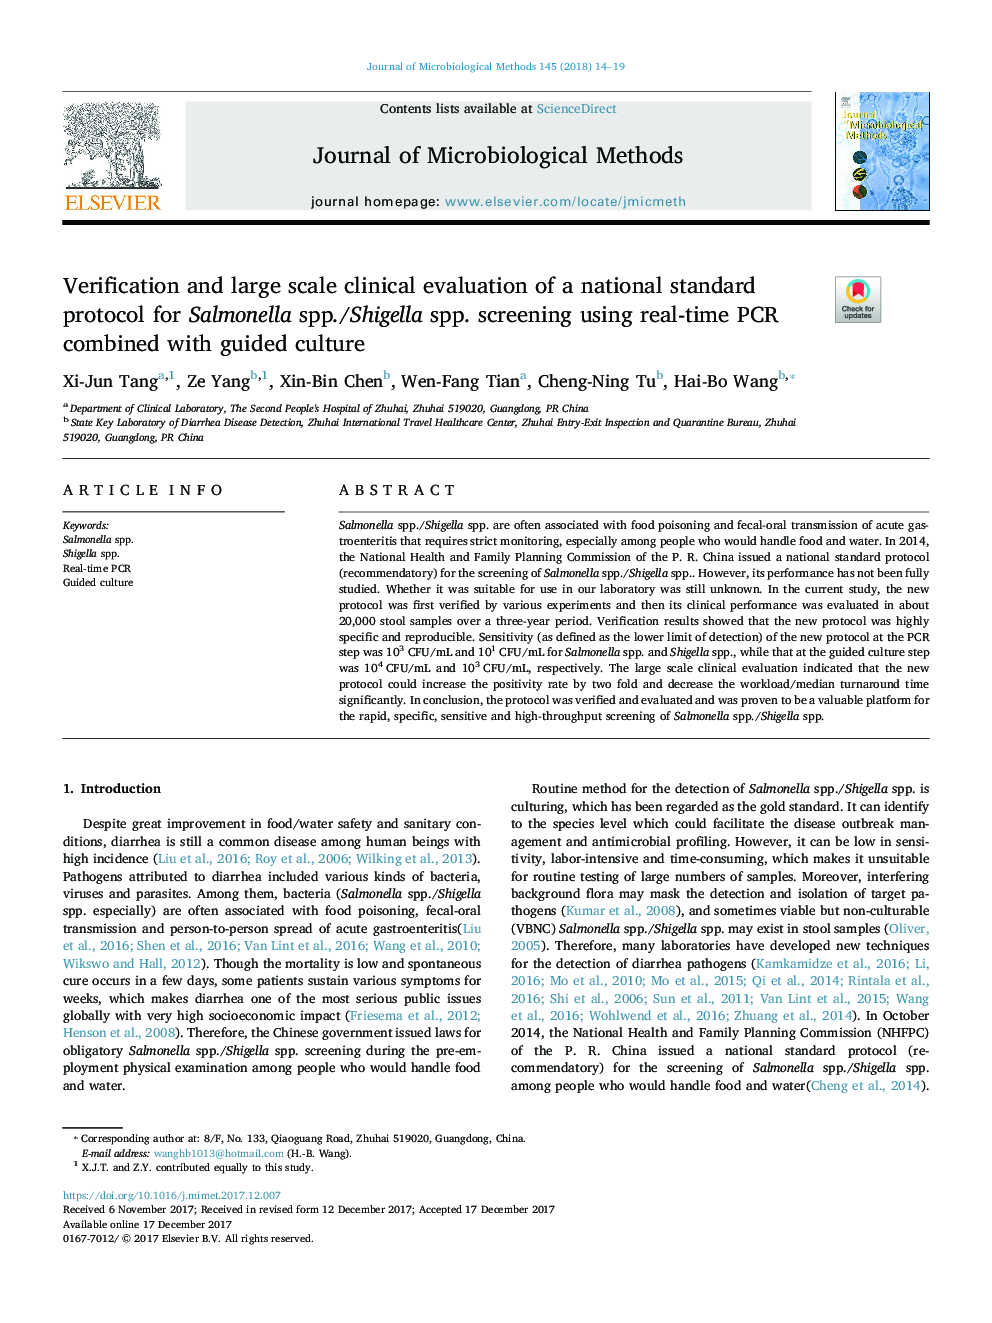 Verification and large scale clinical evaluation of a national standard protocol for Salmonella spp./Shigella spp. screening using real-time PCR combined with guided culture